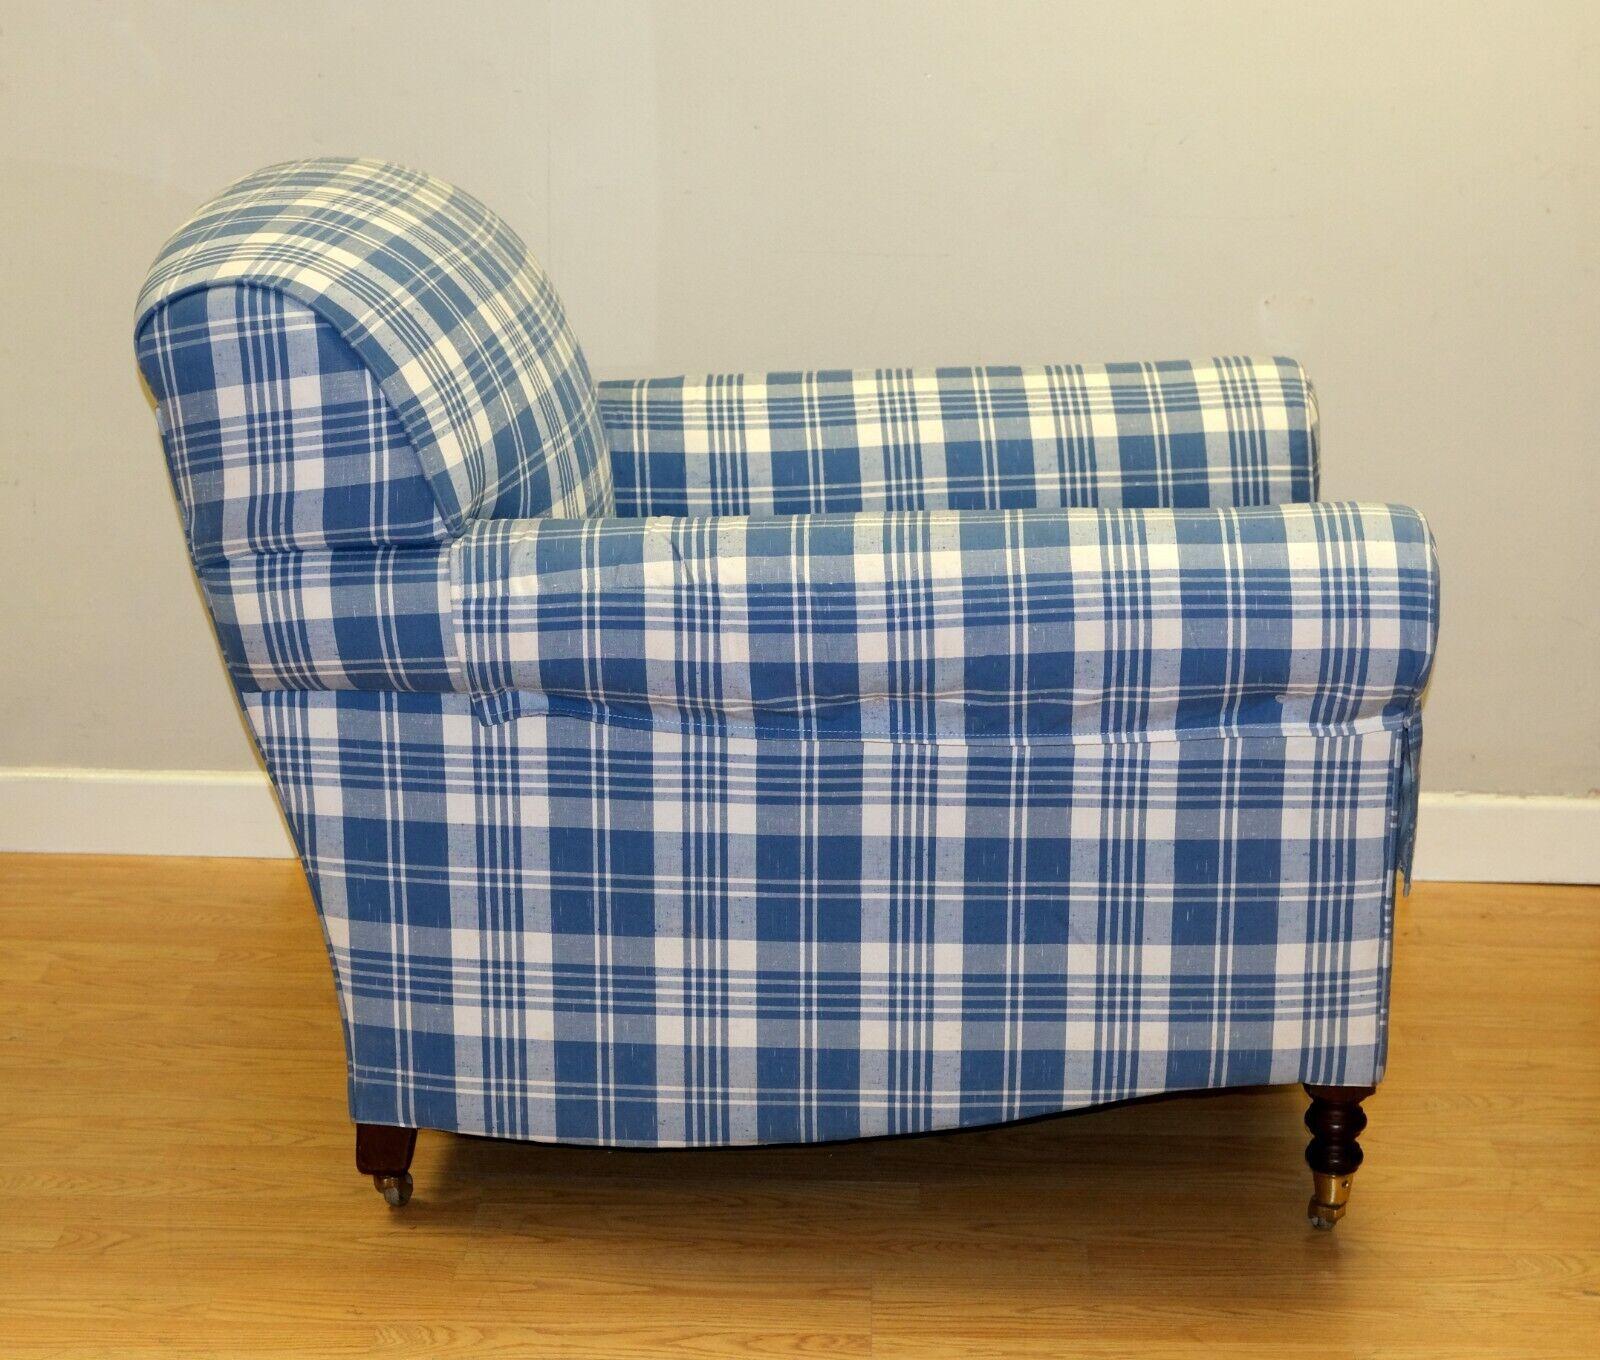 20th Century George Smith Signature Armchair Full Scroll Arms on Royal Blue Fabric & Castors